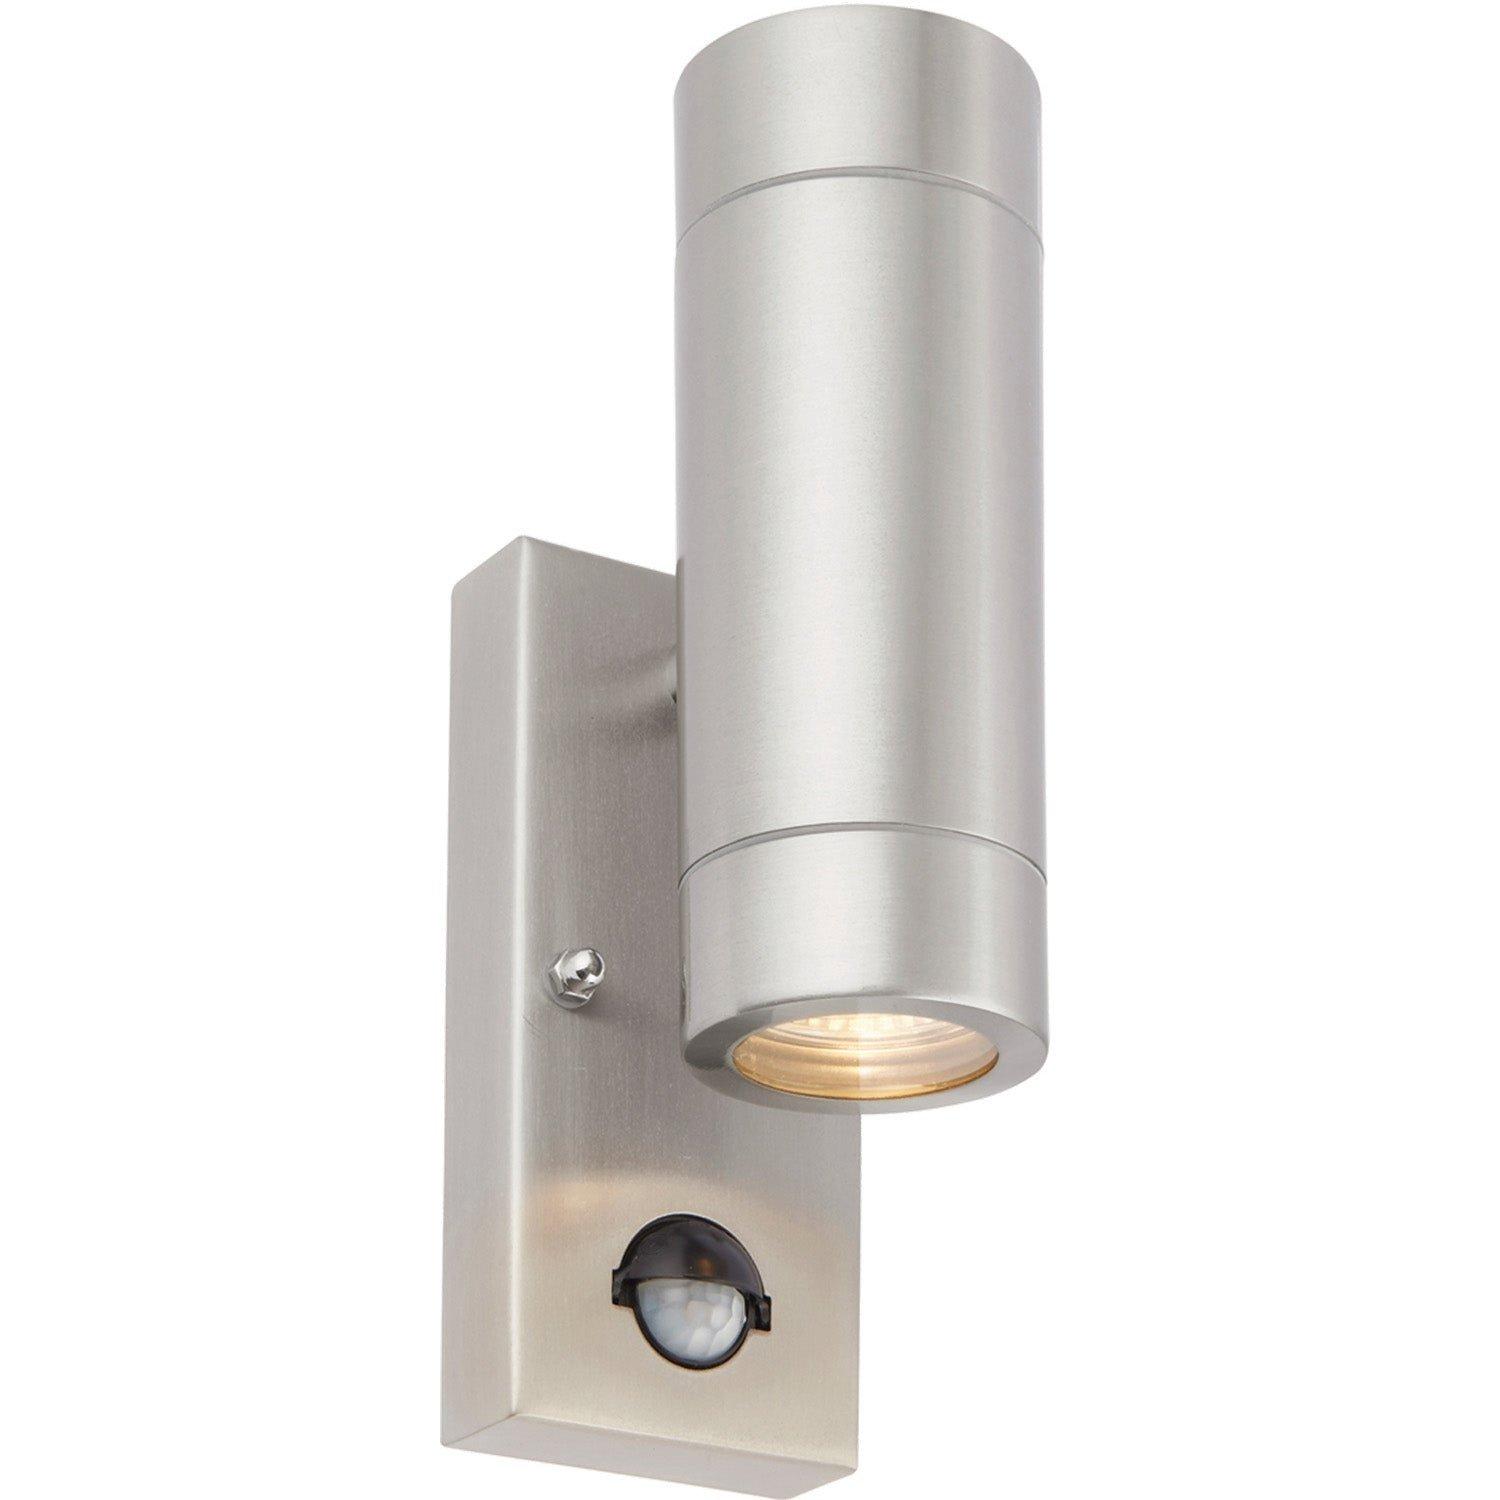 Automatic Up & Down IP44 Wall Light with PIR - 2 x 7W GU10 LED - Brushed Steel